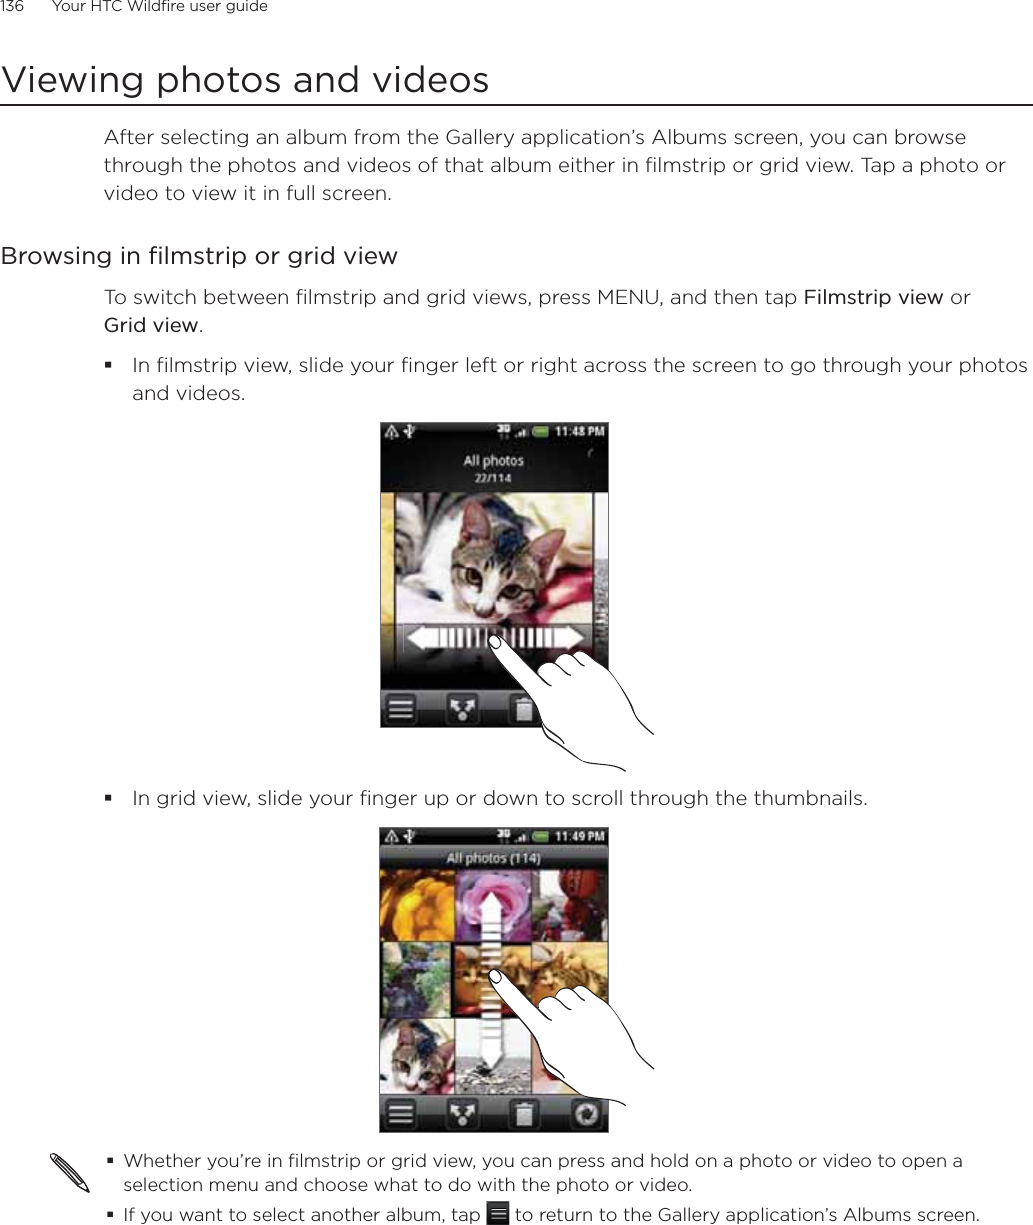 136      Your HTC Wildfire user guide      Viewing photos and videosAfter selecting an album from the Gallery application’s Albums screen, you can browse through the photos and videos of that album either in filmstrip or grid view. Tap a photo or video to view it in full screen.Browsing in filmstrip or grid viewTo switch between filmstrip and grid views, press MENU, and then tap Filmstrip view or Grid view.In filmstrip view, slide your finger left or right across the screen to go through your photos and videos.In grid view, slide your finger up or down to scroll through the thumbnails.Whether you’re in filmstrip or grid view, you can press and hold on a photo or video to open a selection menu and choose what to do with the photo or video.If you want to select another album, tap   to return to the Gallery application’s Albums screen.